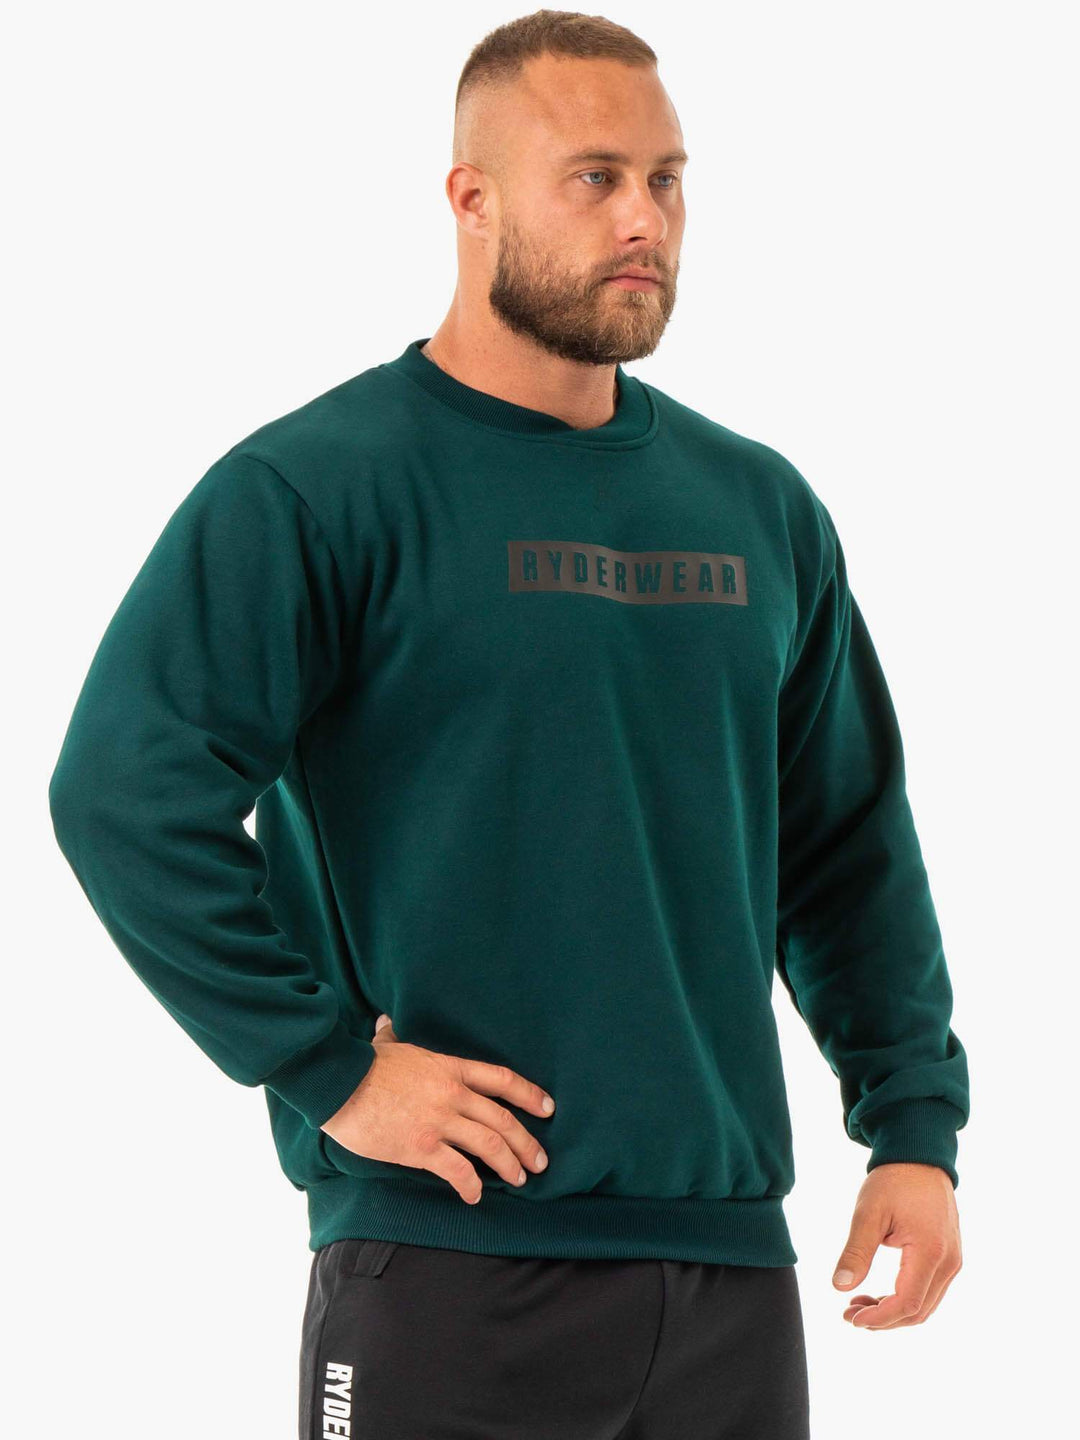 Force Pullover - Forest Green Clothing Ryderwear 